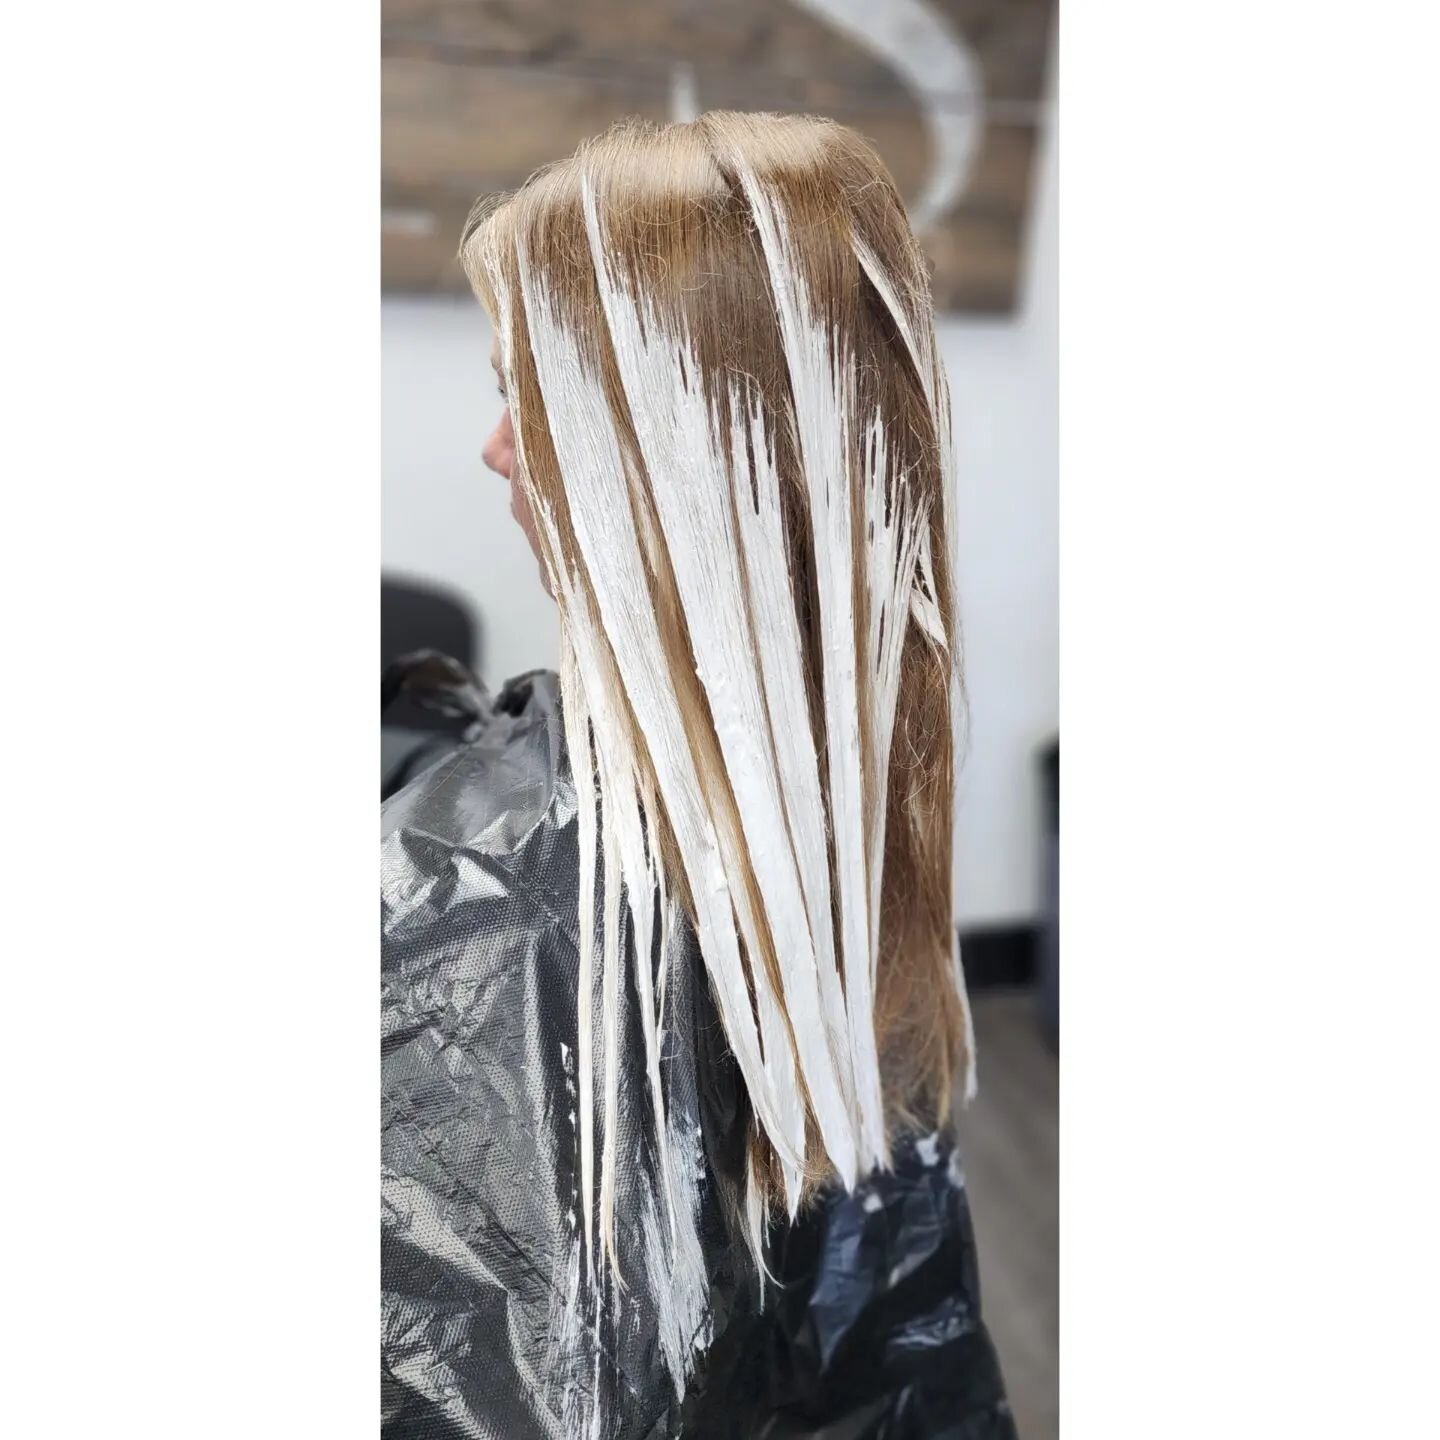 Balayage means &quot;to sweep&quot; 
Hand painted surface painting of the hair. This was her first chemical service. We kept the highlights fairly natural. 
Liberty 40vol 
#nounou #davines #davinescolor #oi #moreinside